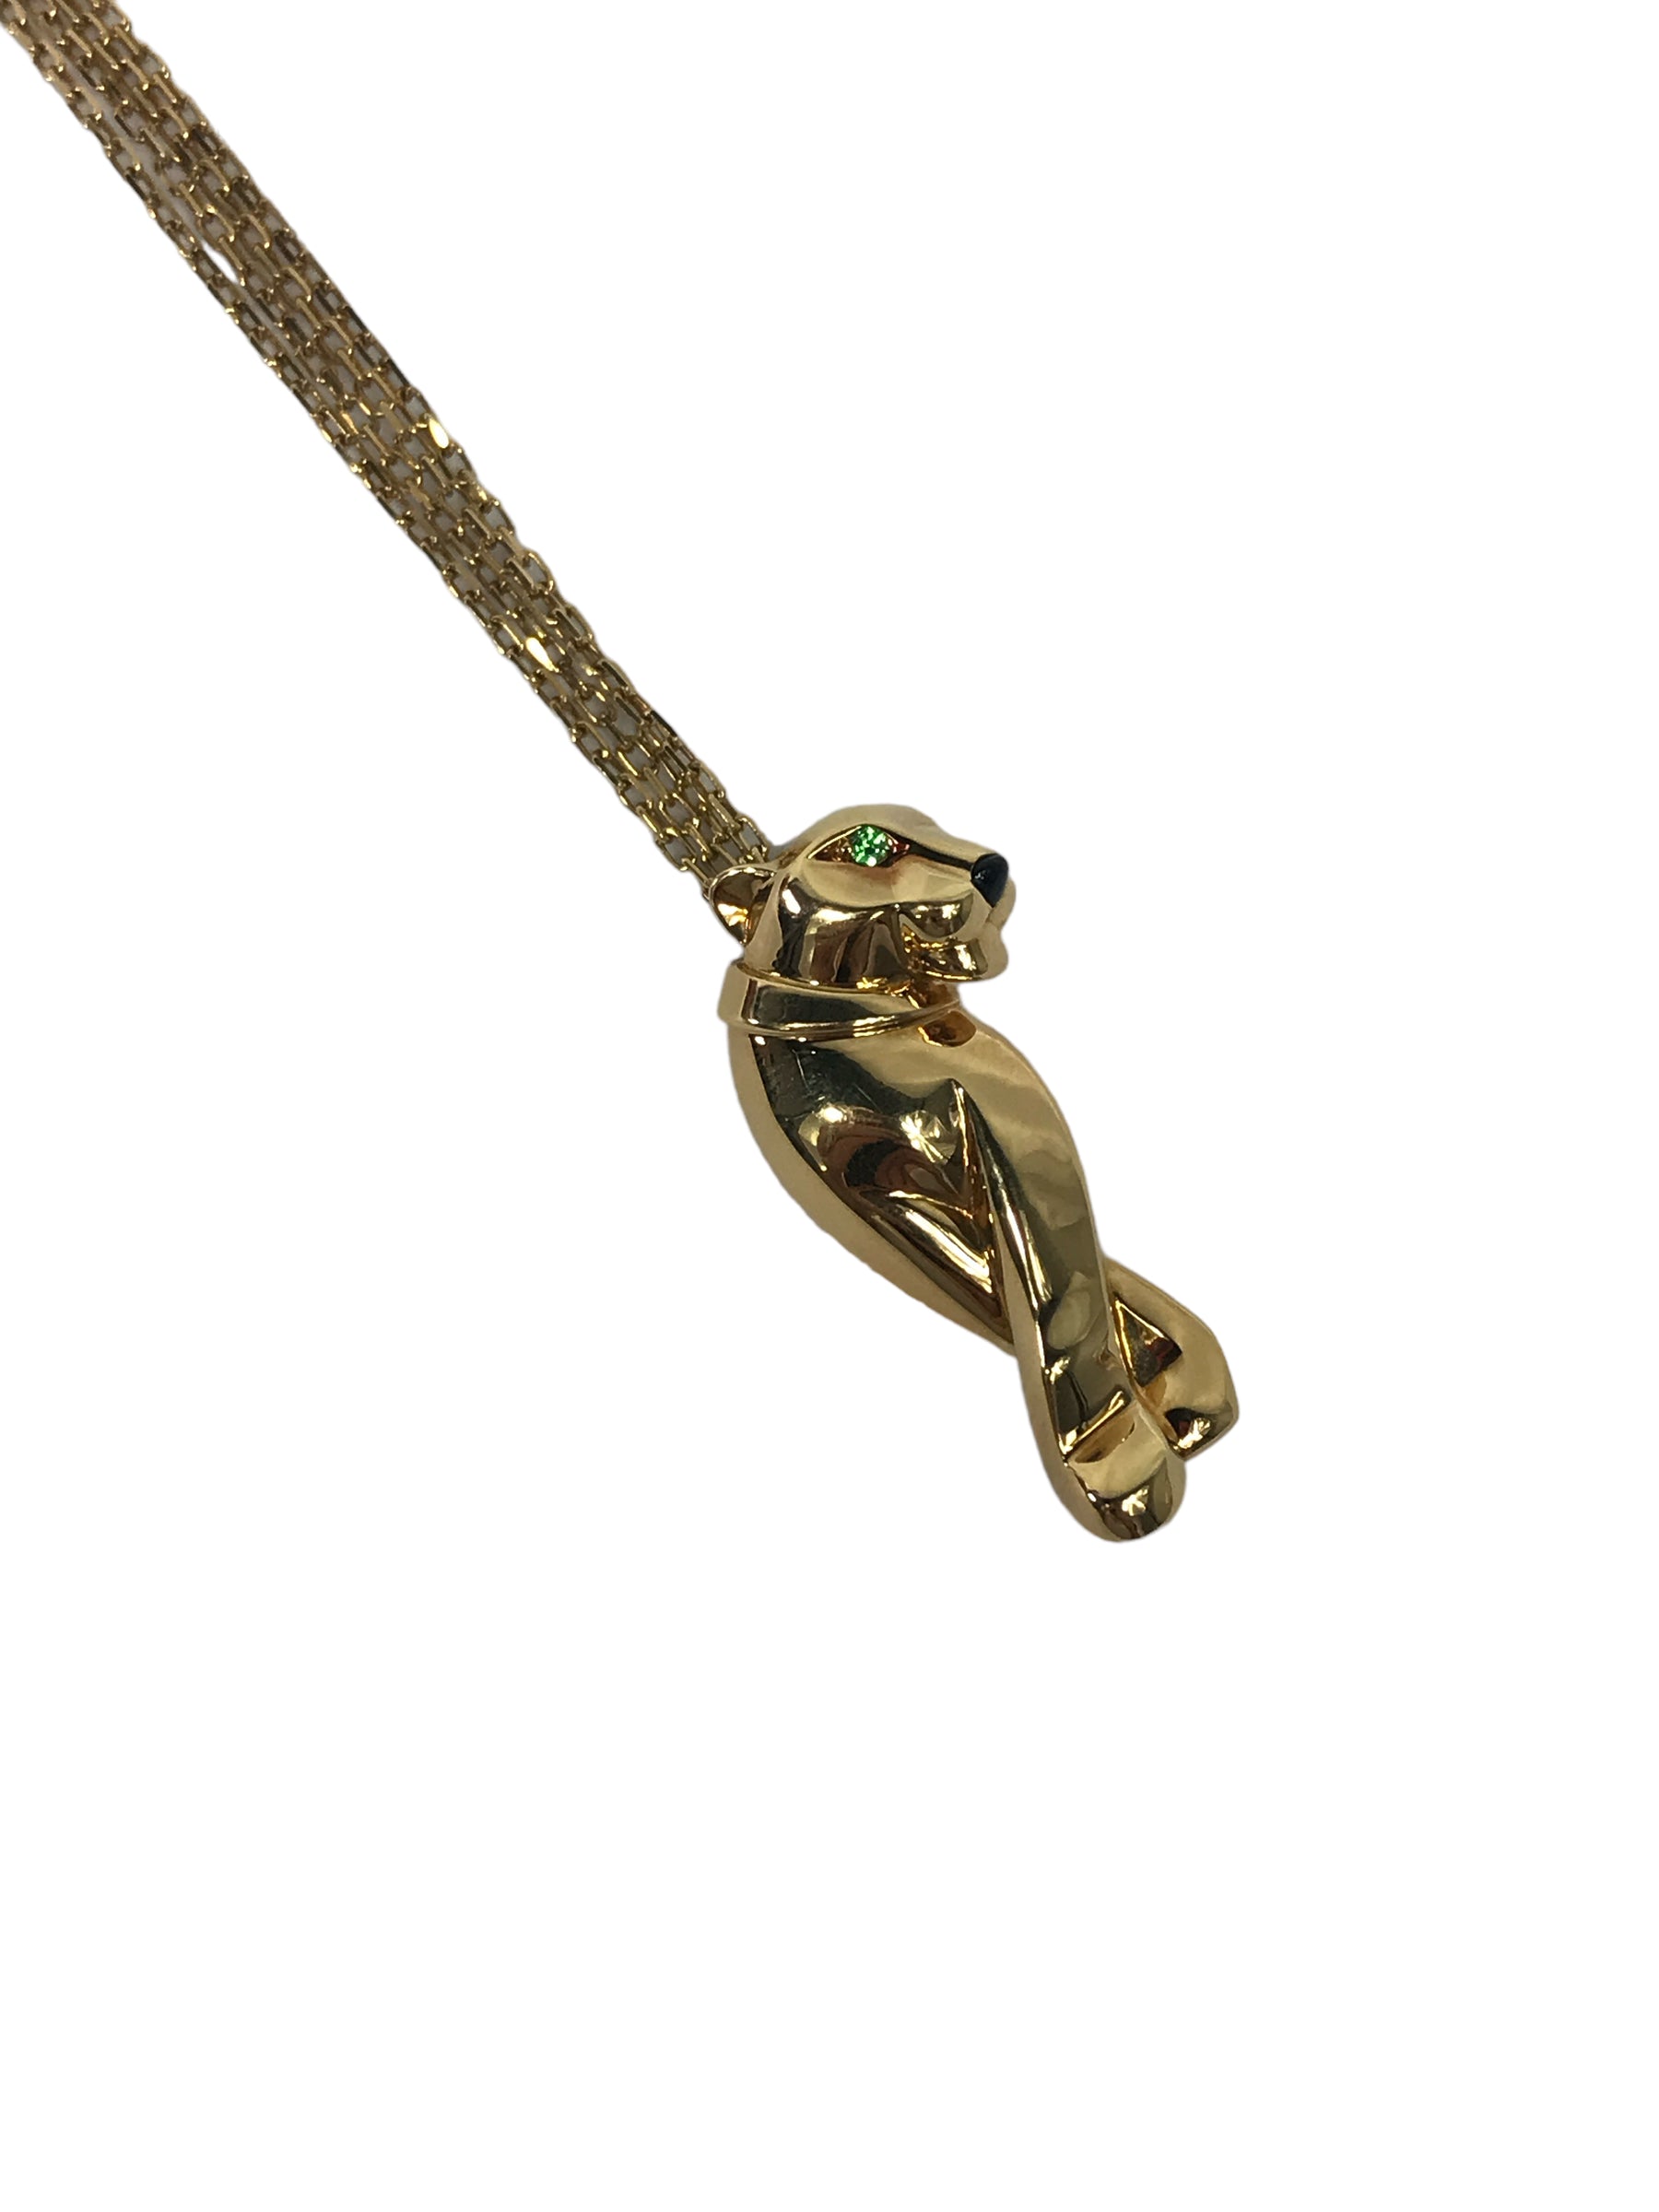 18K Yellow Gold Panther de Cartier Pedant w/ tsavorite garnets and nose made from onyx